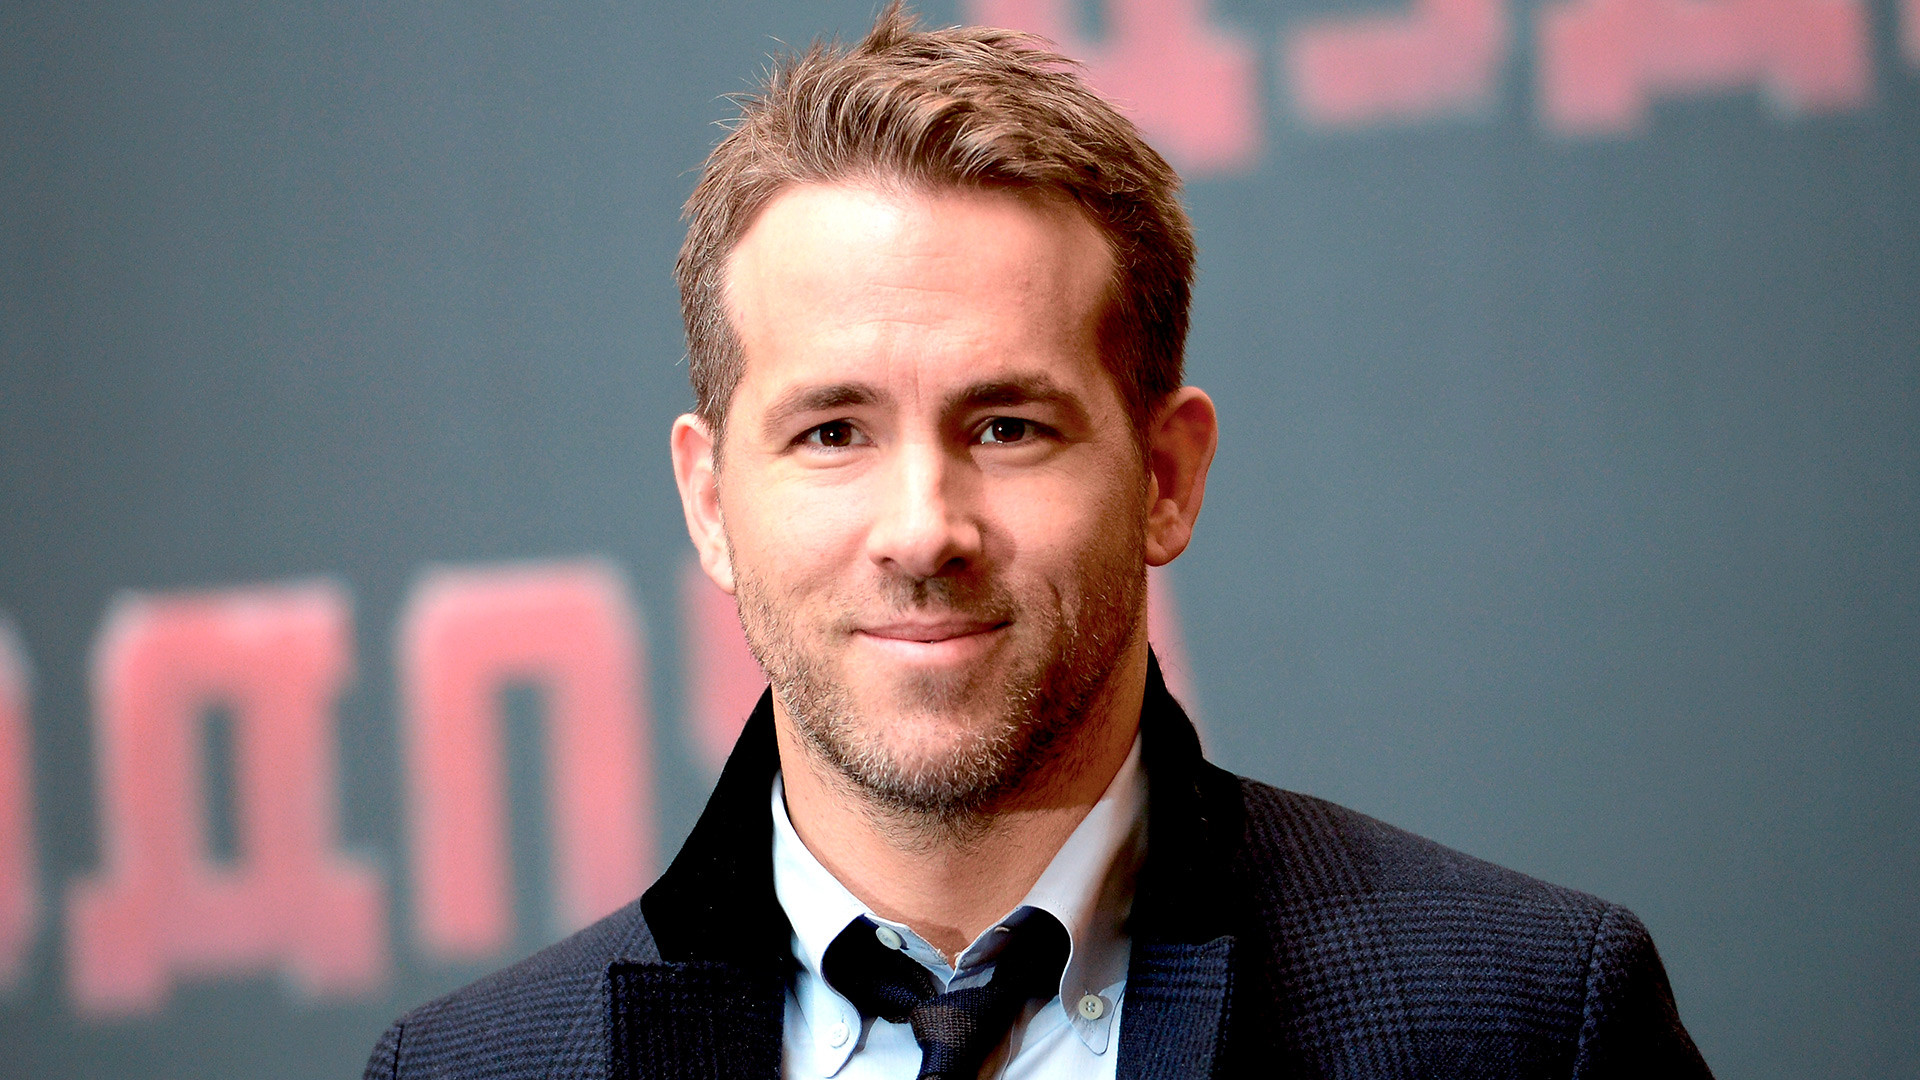  Ryan Reynolds at the Ritz Carlton Hotel in Moscow.